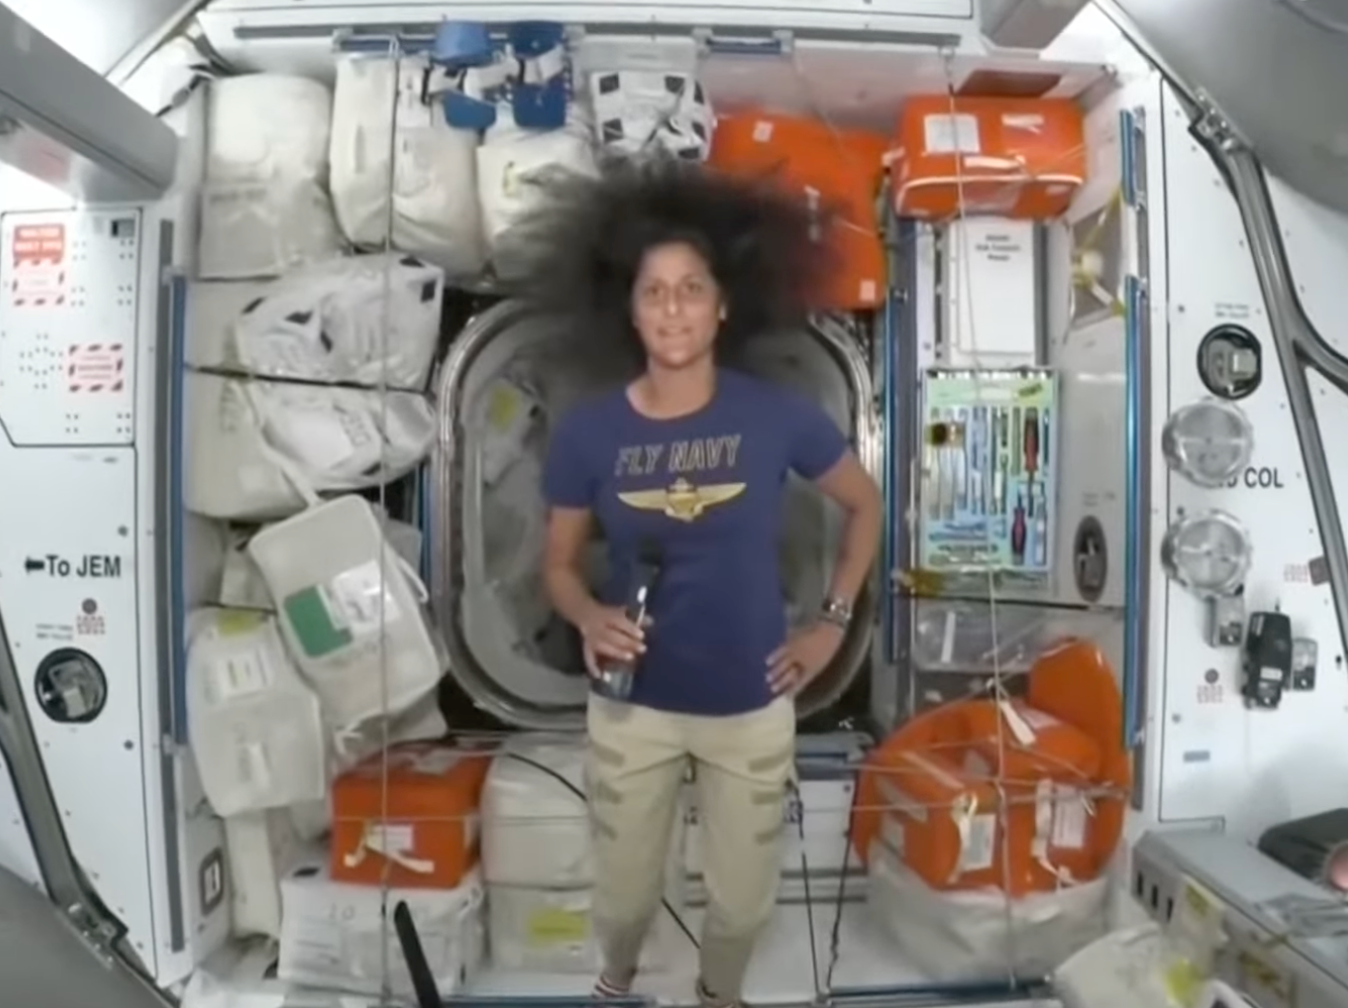 Suni Williams, pictured, gives a tour of the International Space Station (ISS) on June 8. Williams and Butch Wilmore will remain on the ISS until at least June 26, NASA officials said